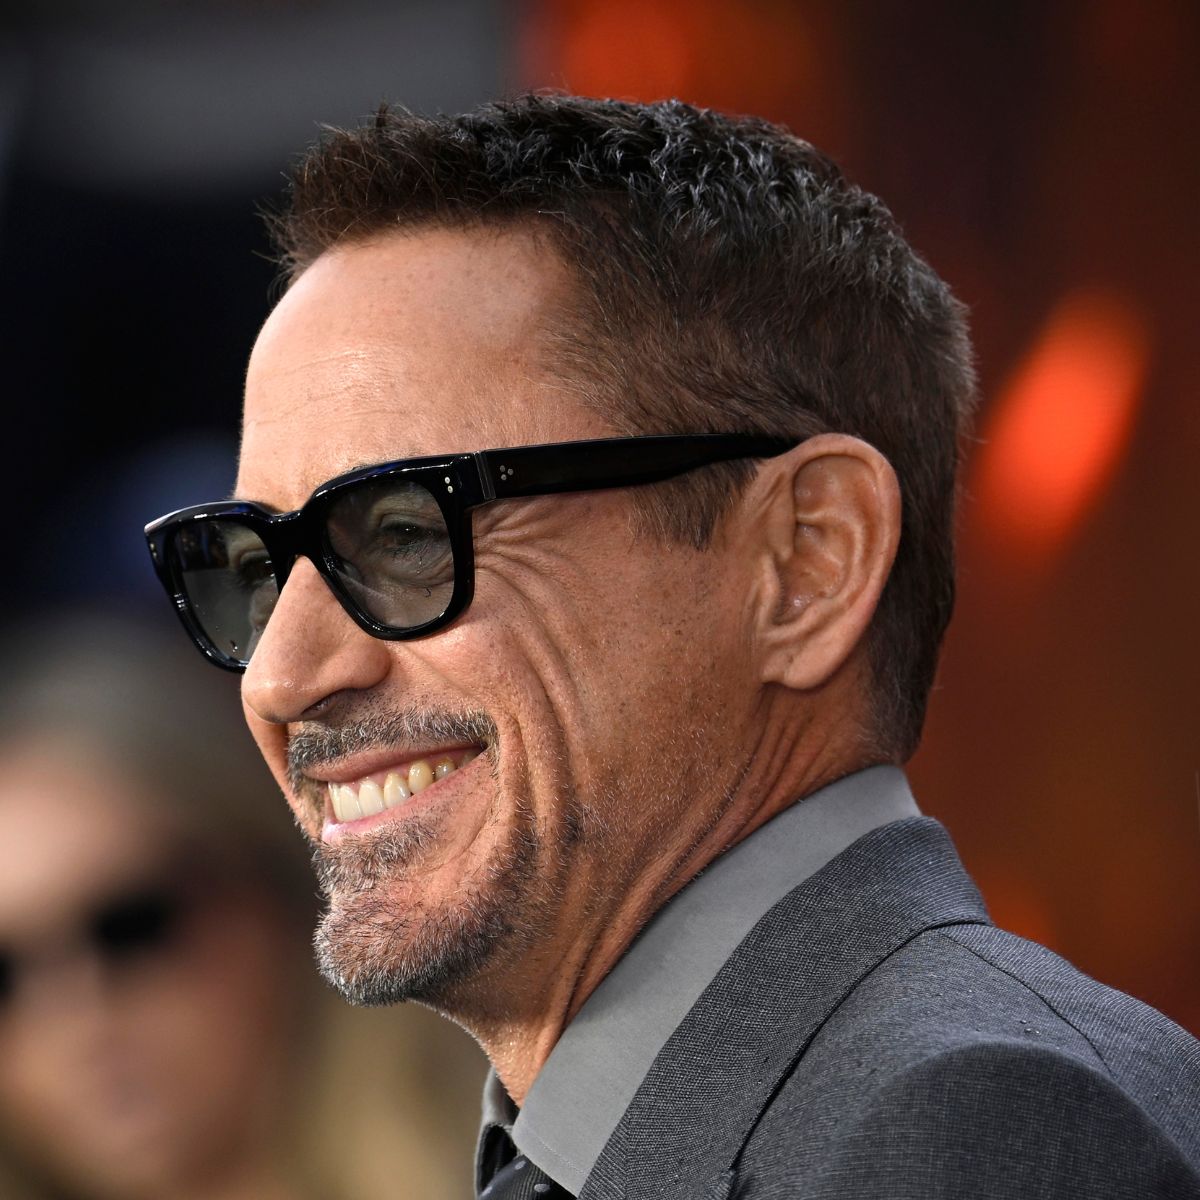 robert-downey-jr-dyed-crew-cut-with-low-fade-hairstyle-haircut-man-for-himself-ft.jpg